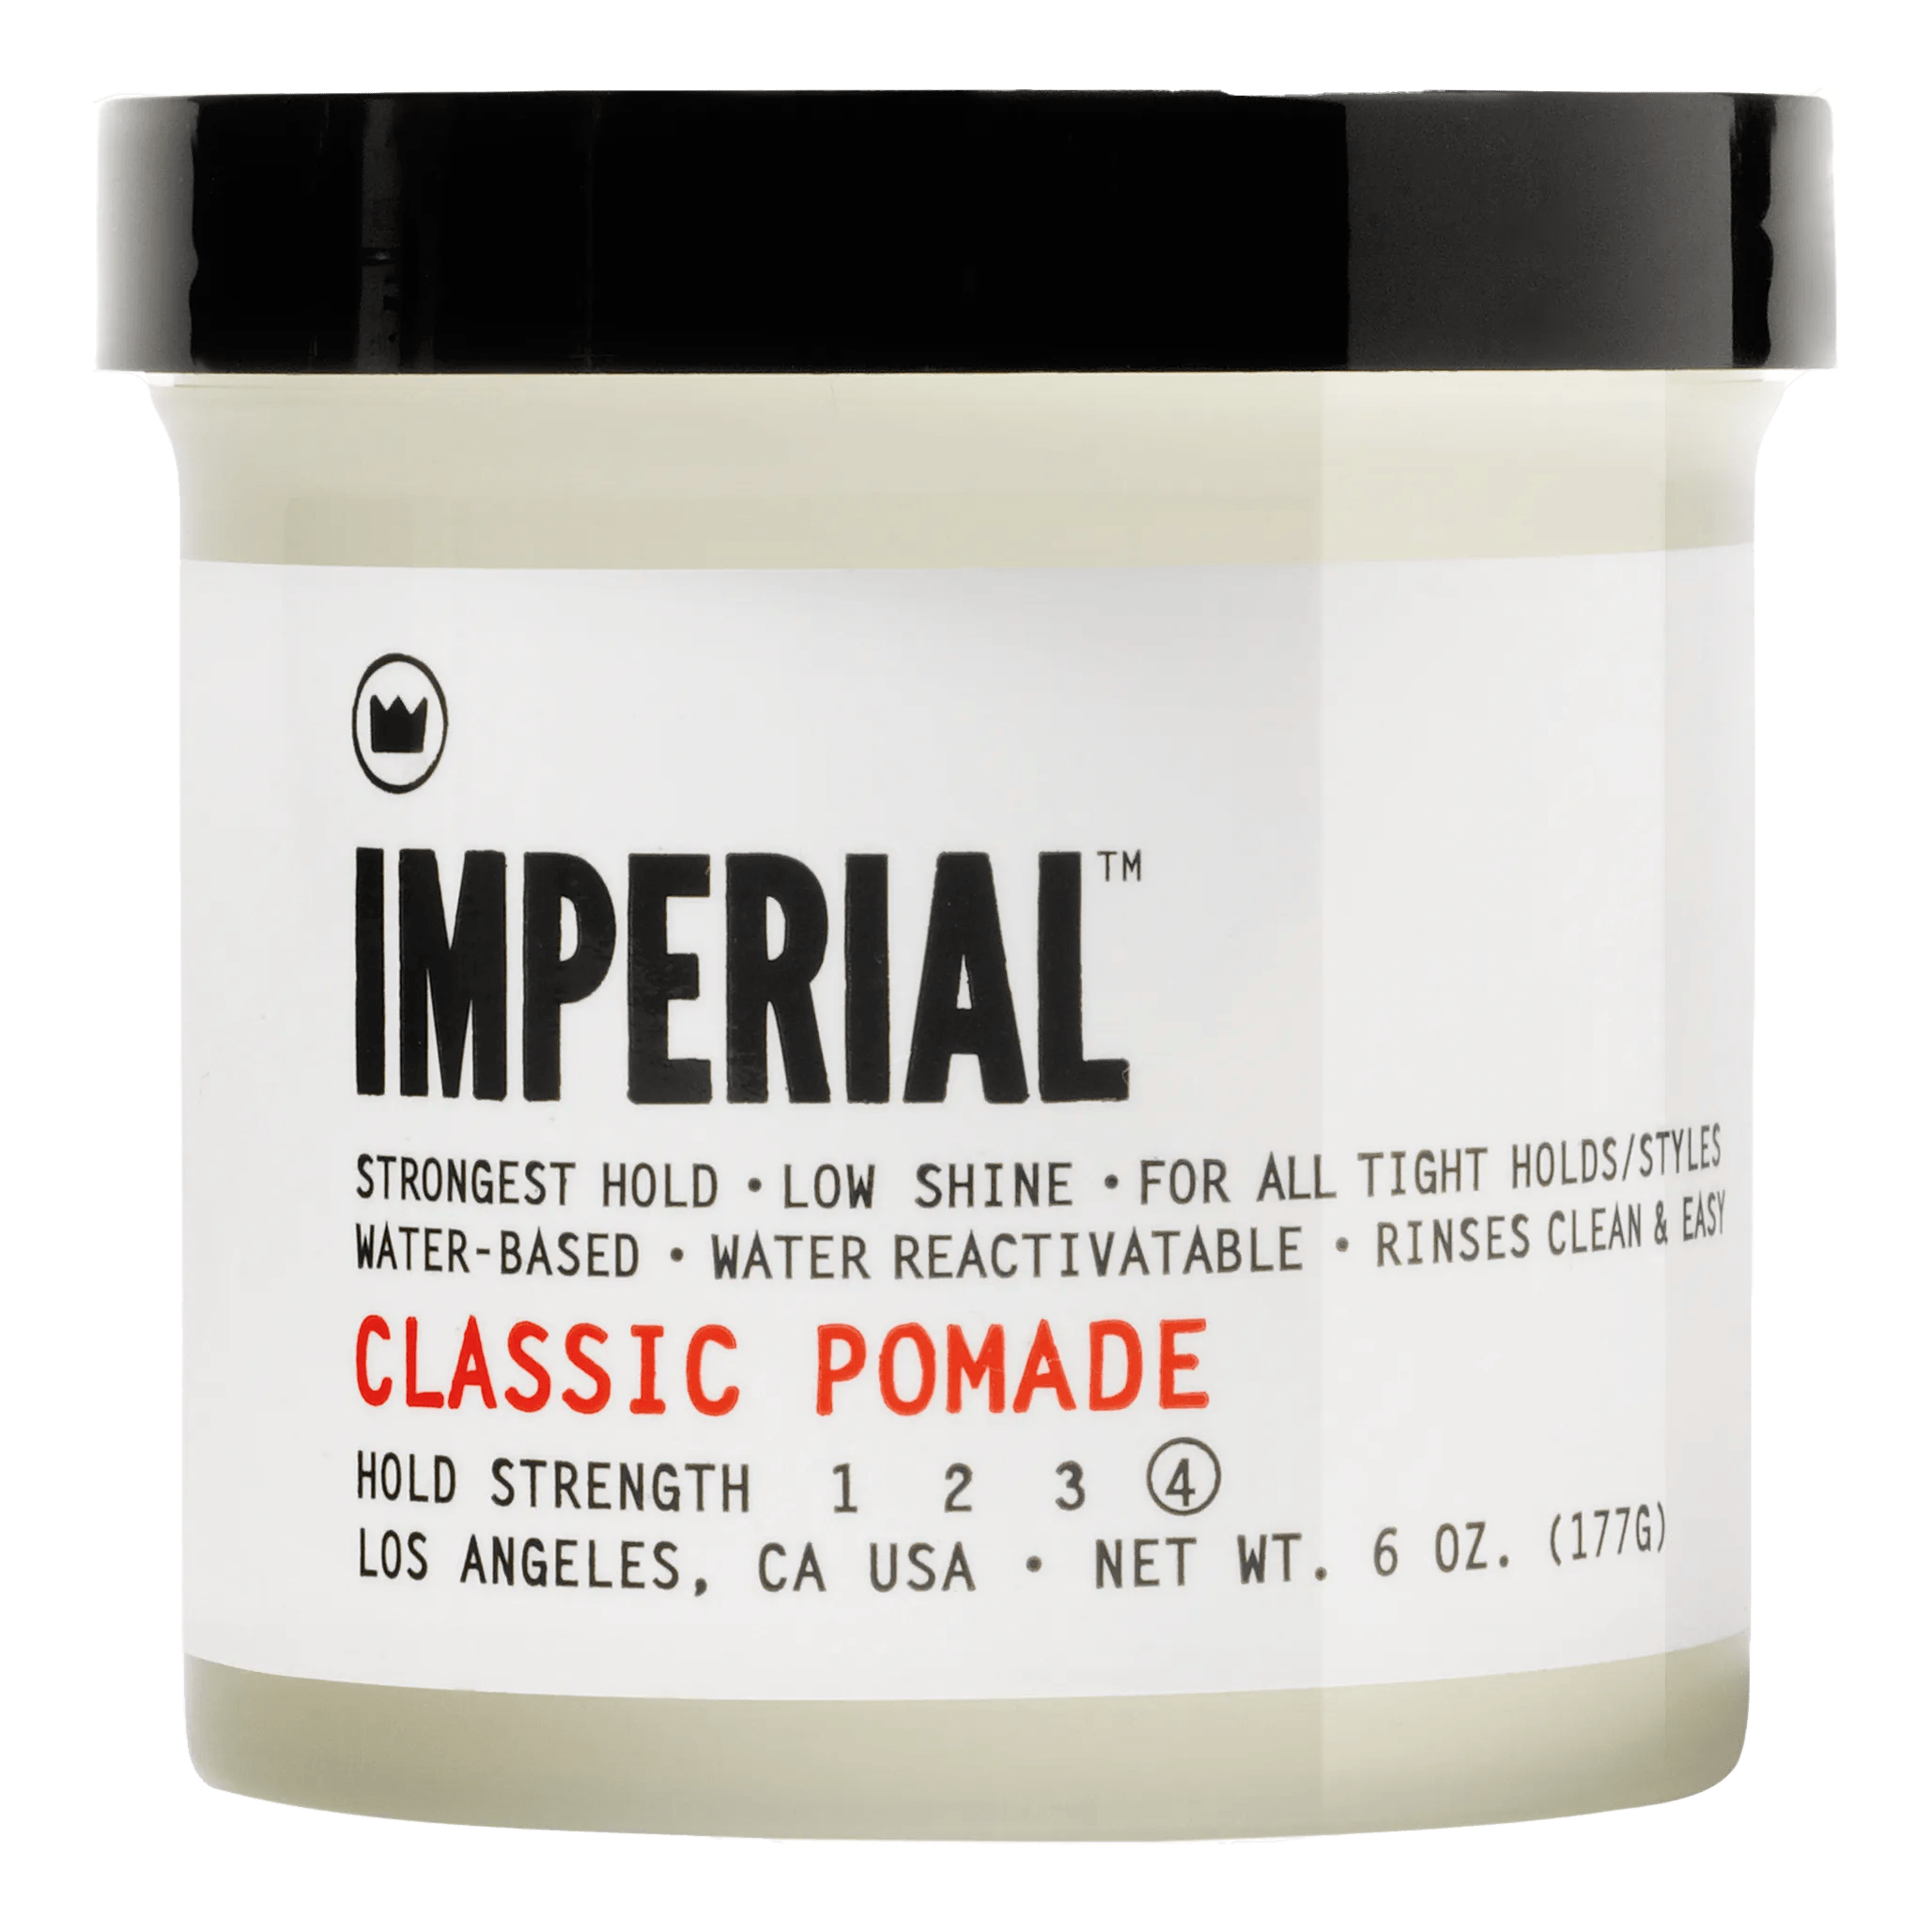 Imperial Barber Products Classic Pomade